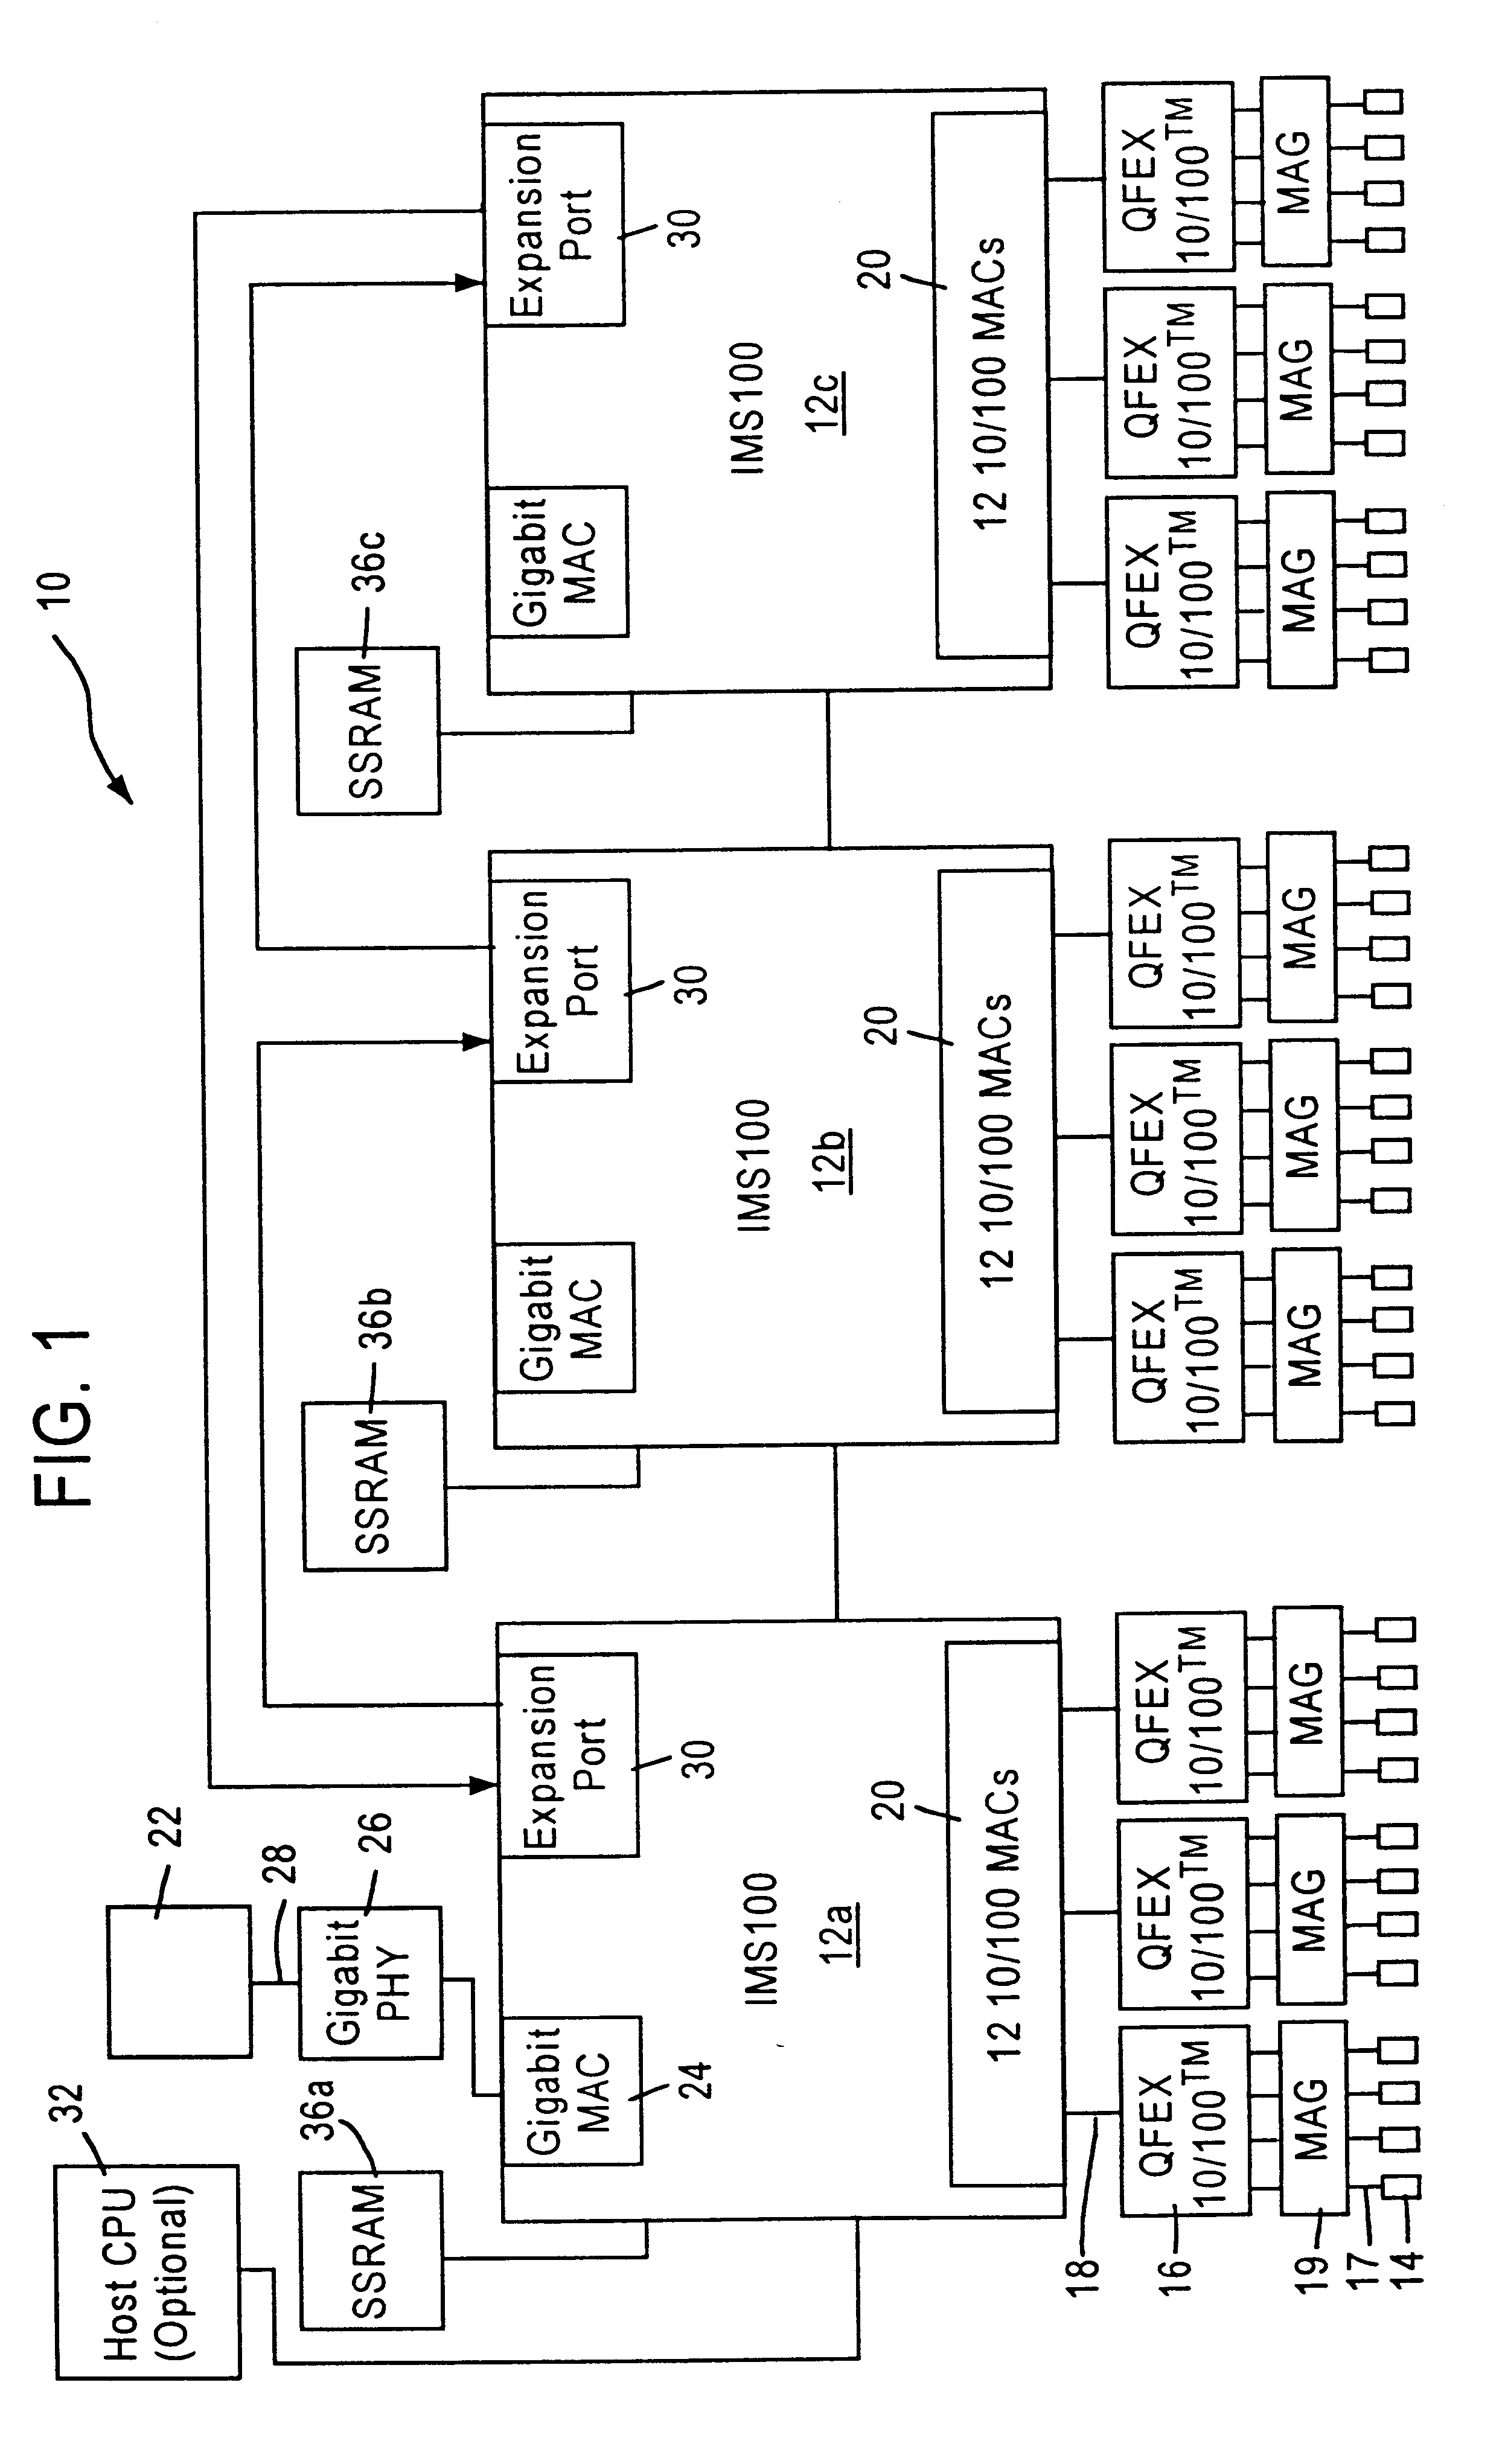 Apparatus and method for sharing an external memory between multiple network switches